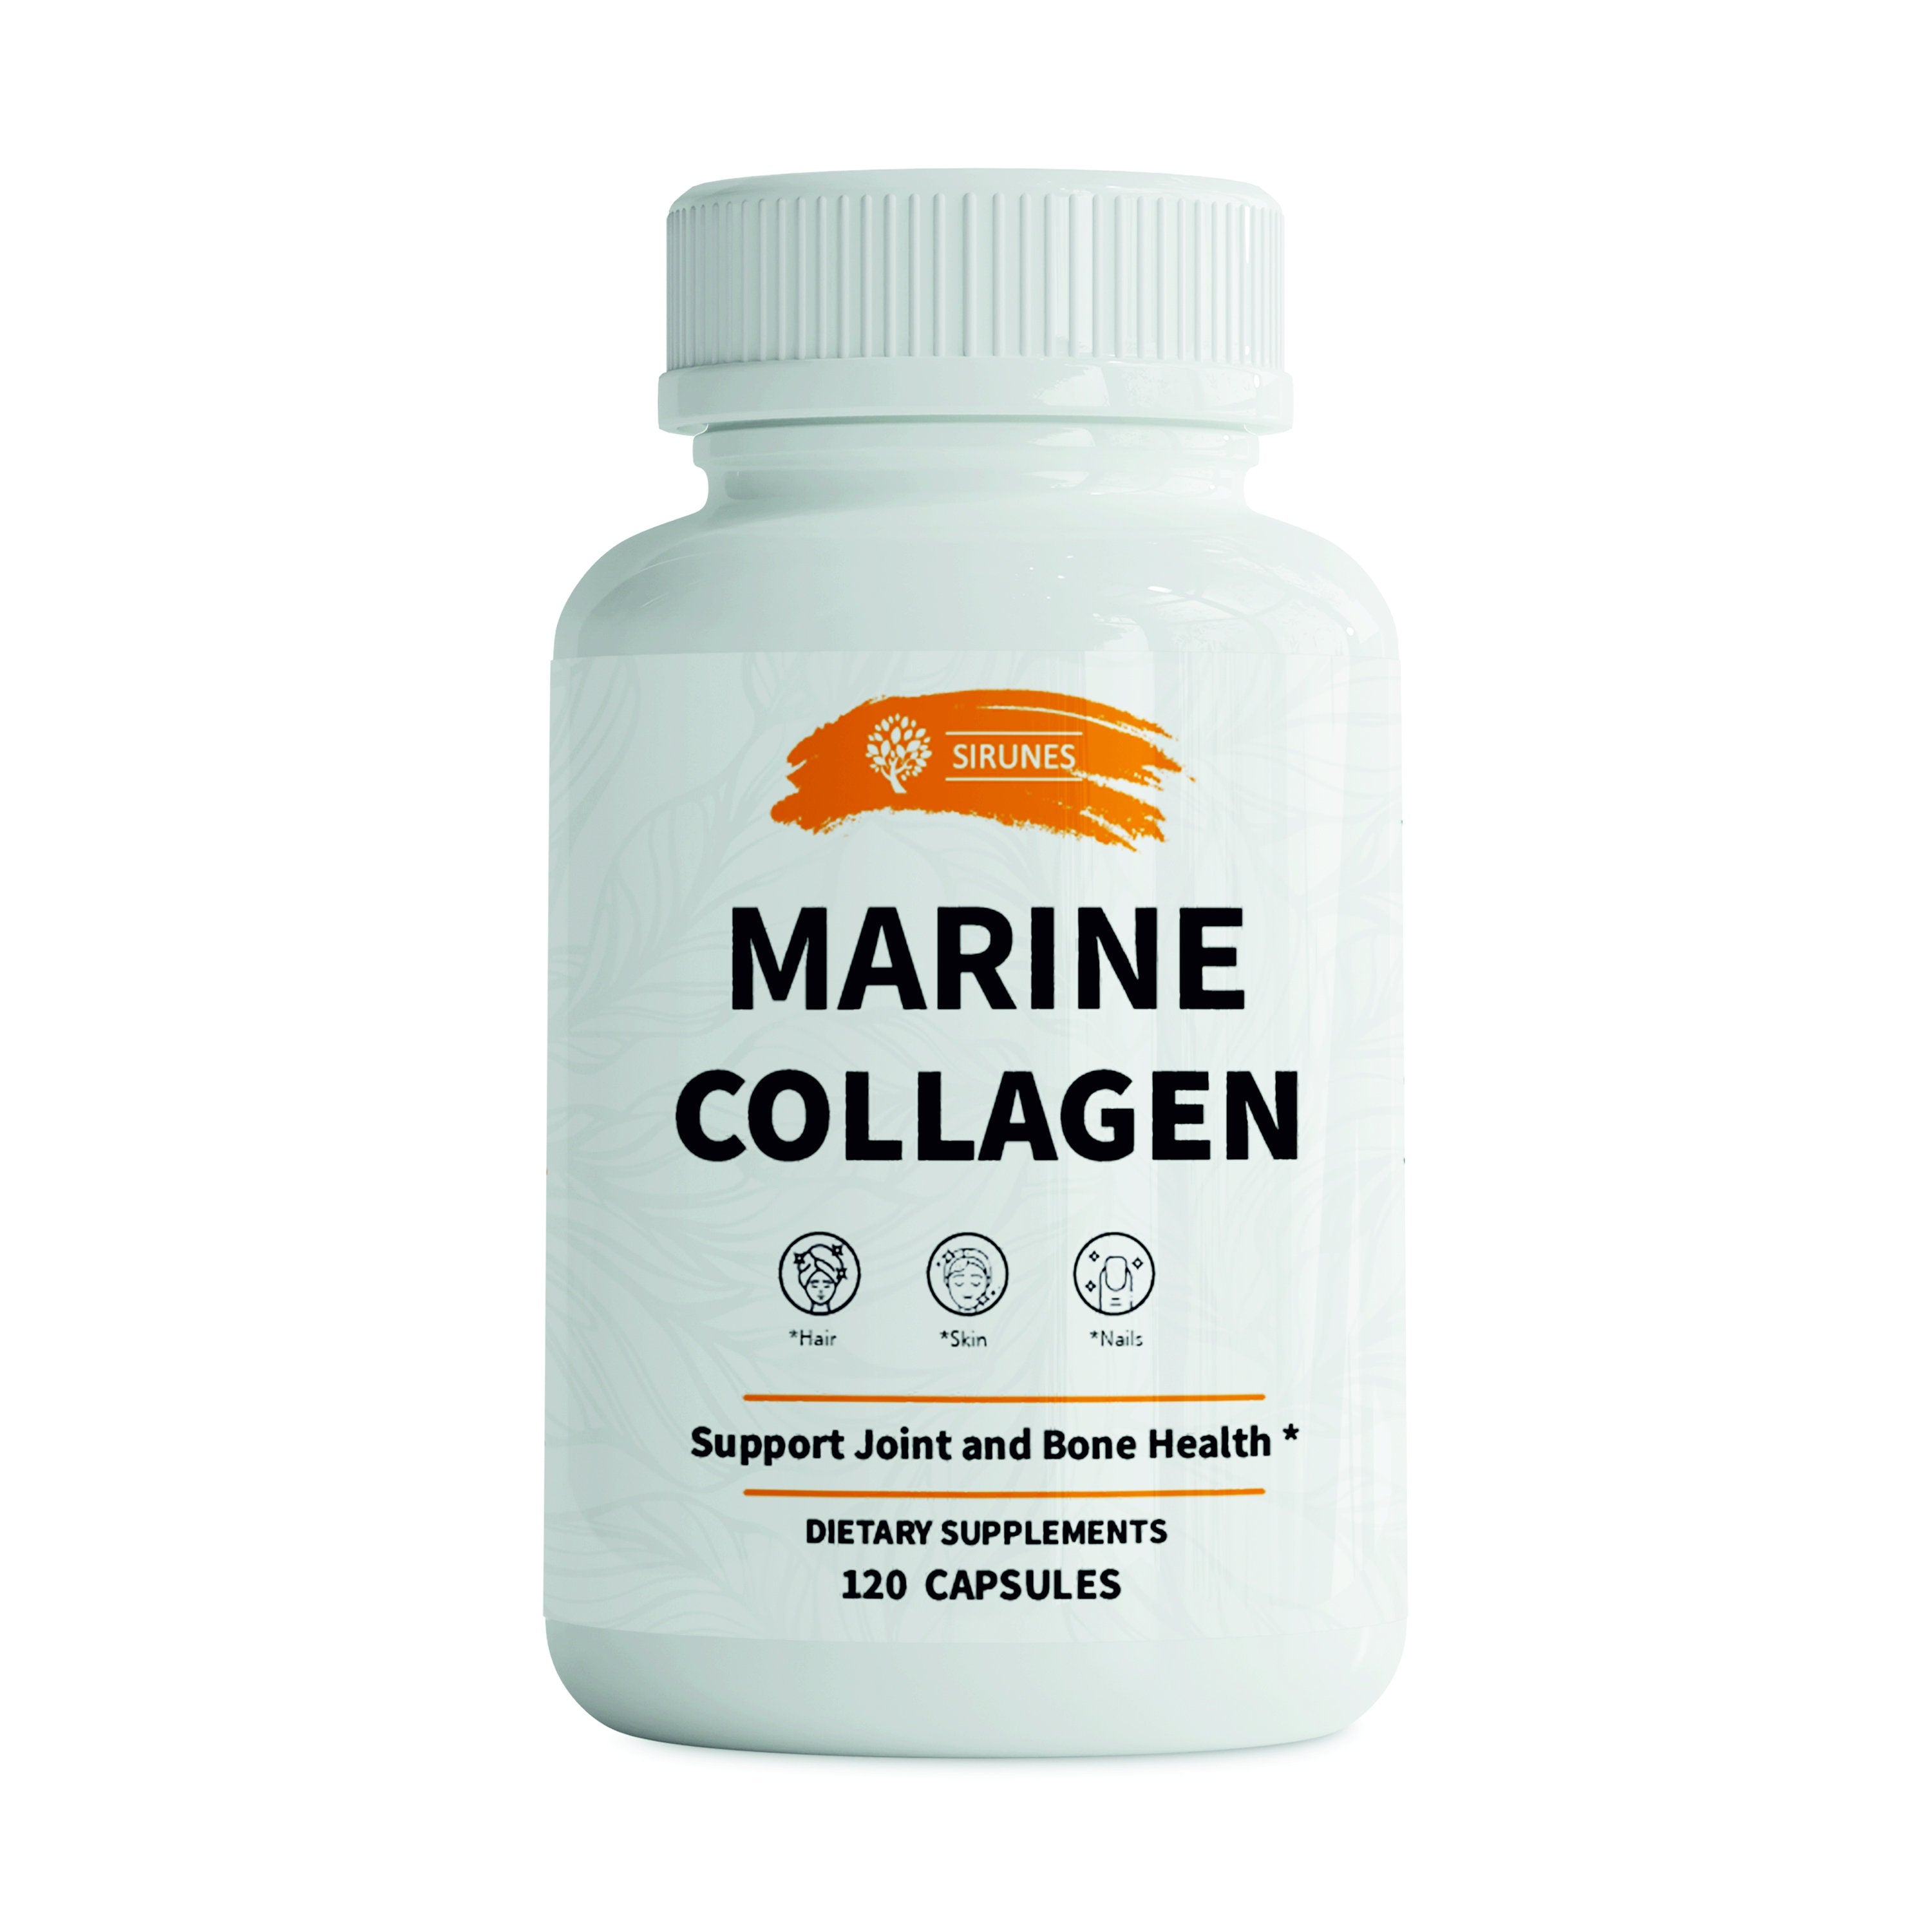 Organic Marine Collagen Peptides, 120 Capsules - Fish Collagen Supplements for Women, Great for Hair, Skin, Nails, Joints & Bones